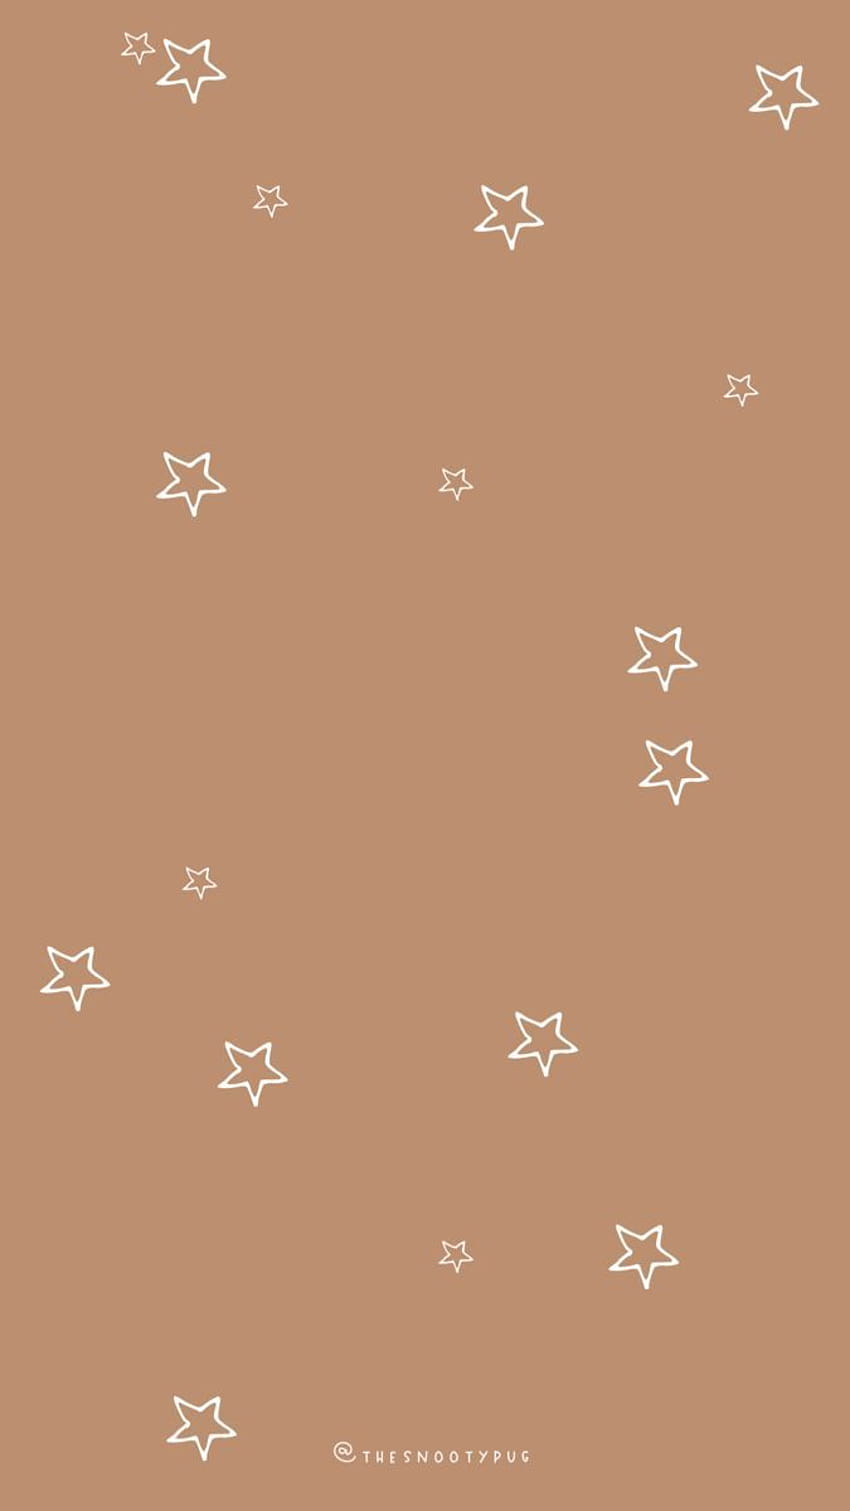 Brown background with white stars cute backgrounds for your phone phone wallpaper ideas - Warm